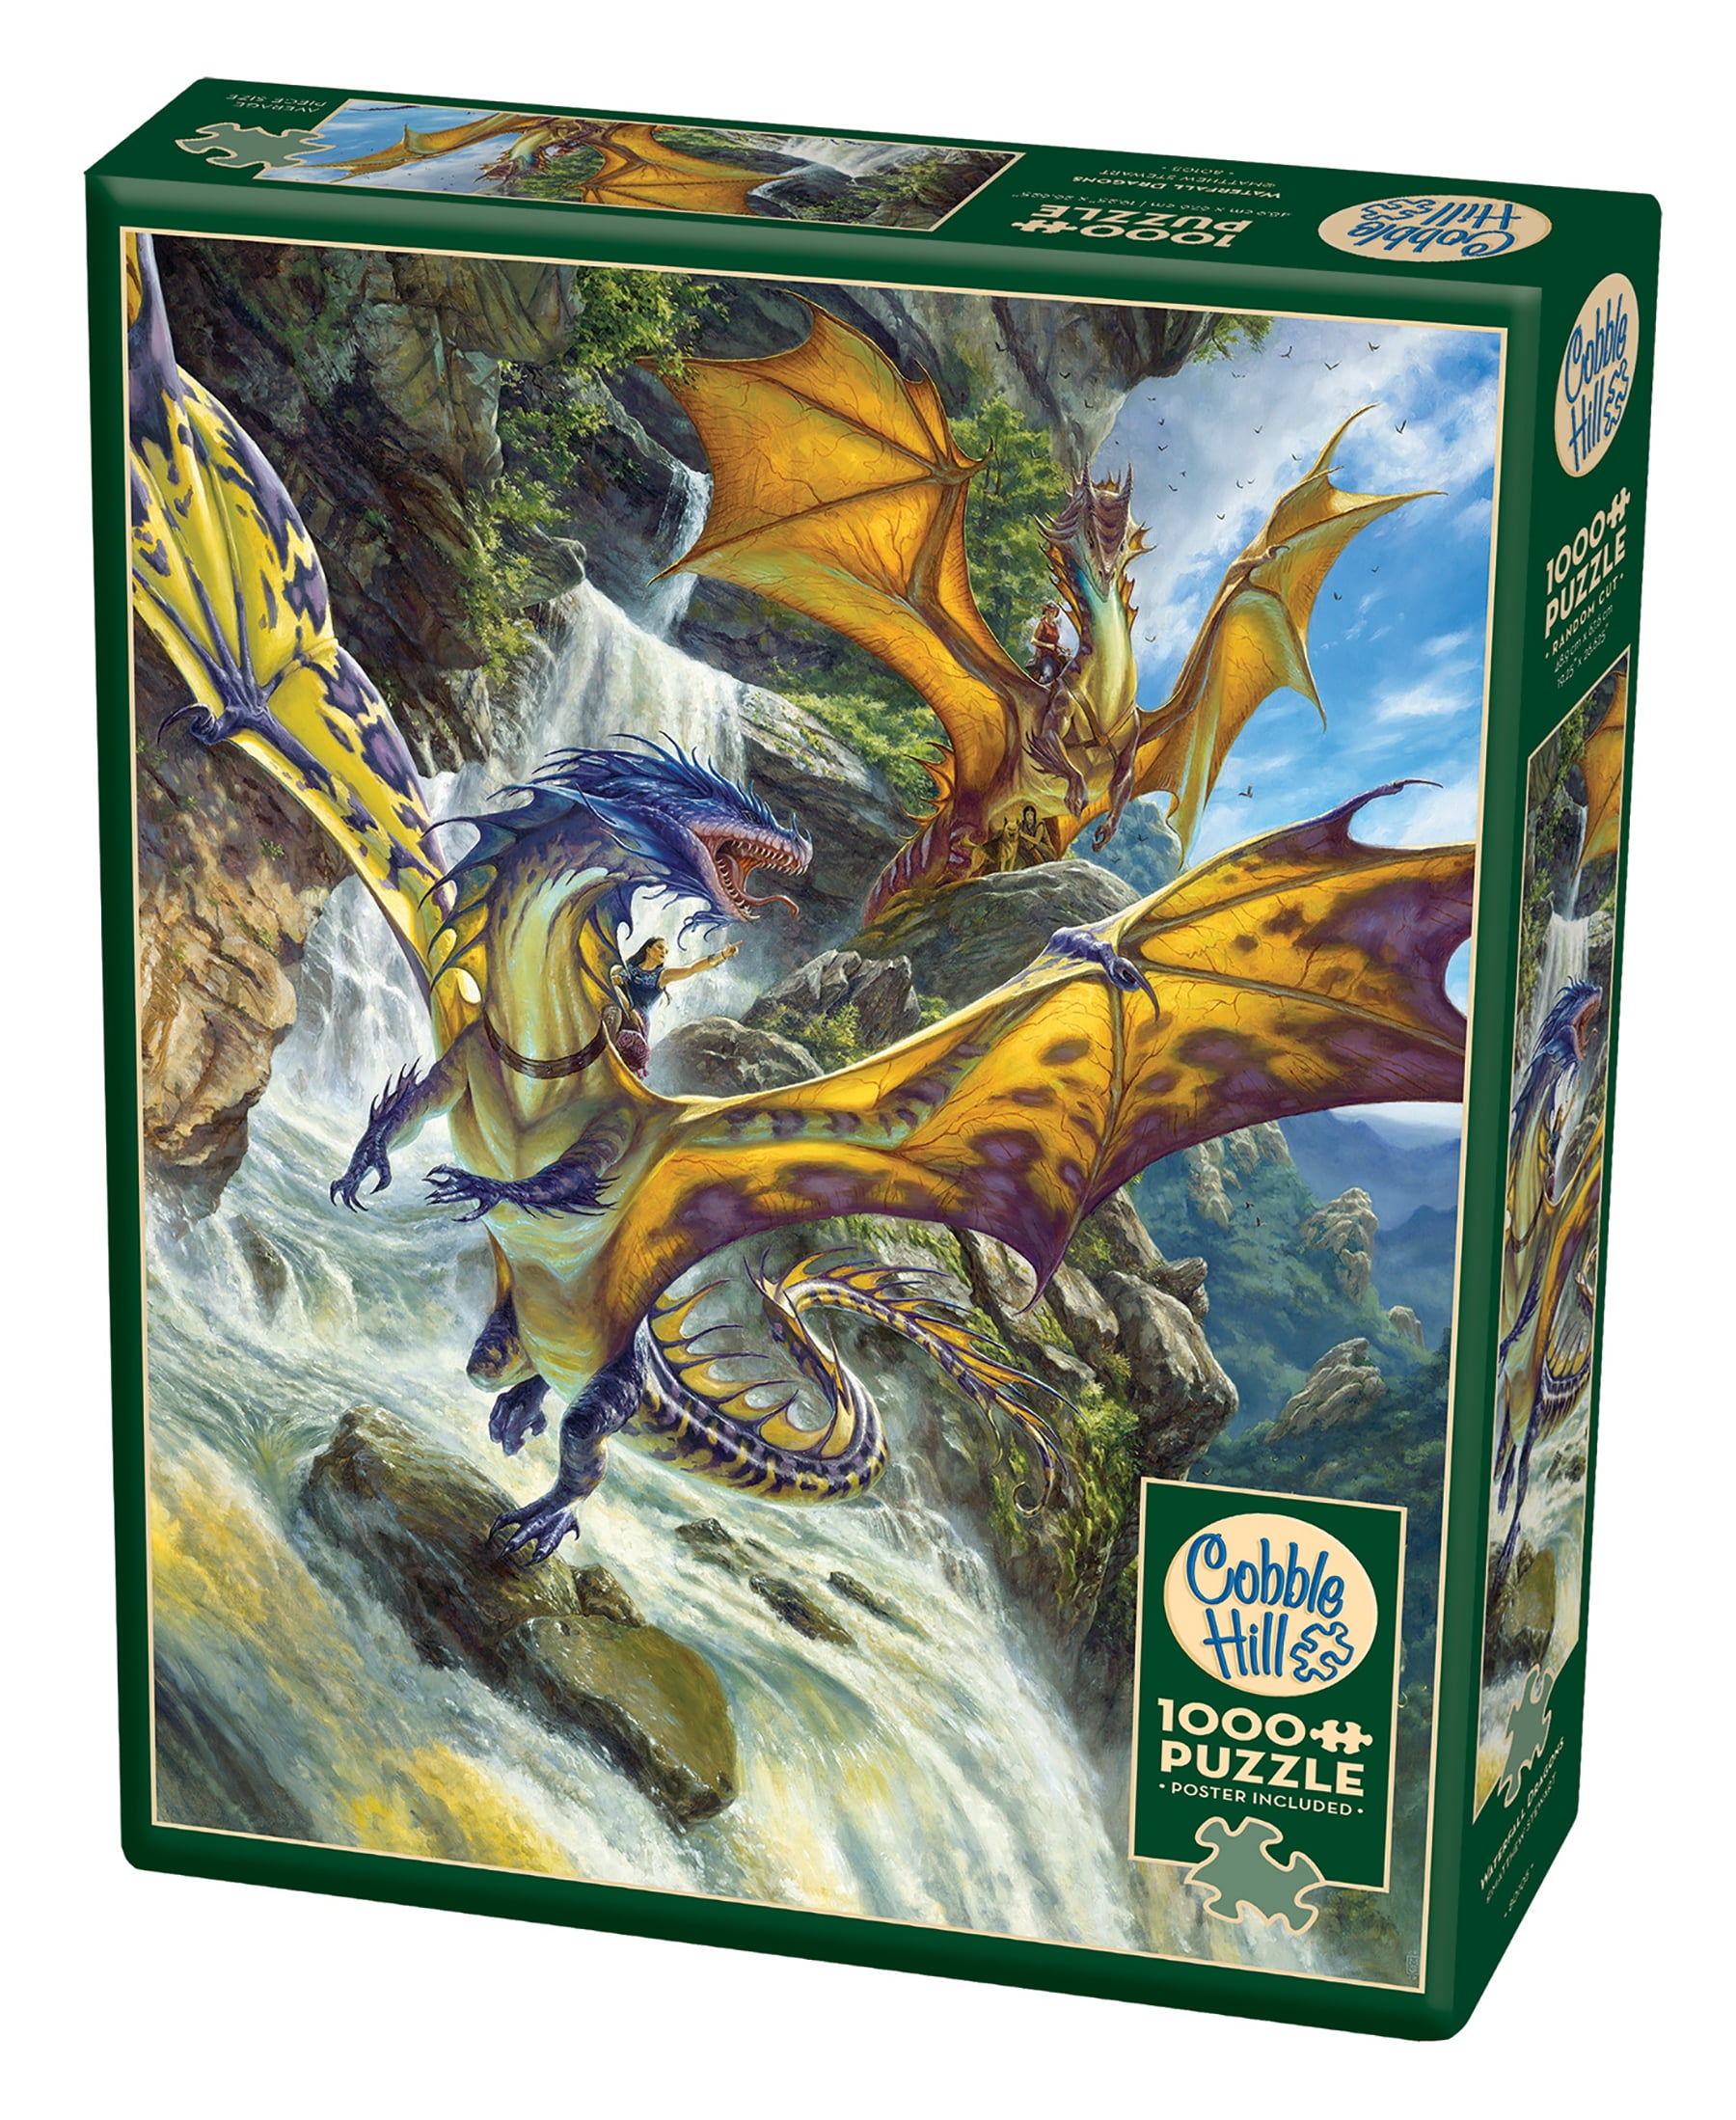 Cobble Hill Waterfall Dragons 20 Piece Jigsaw Puzzle